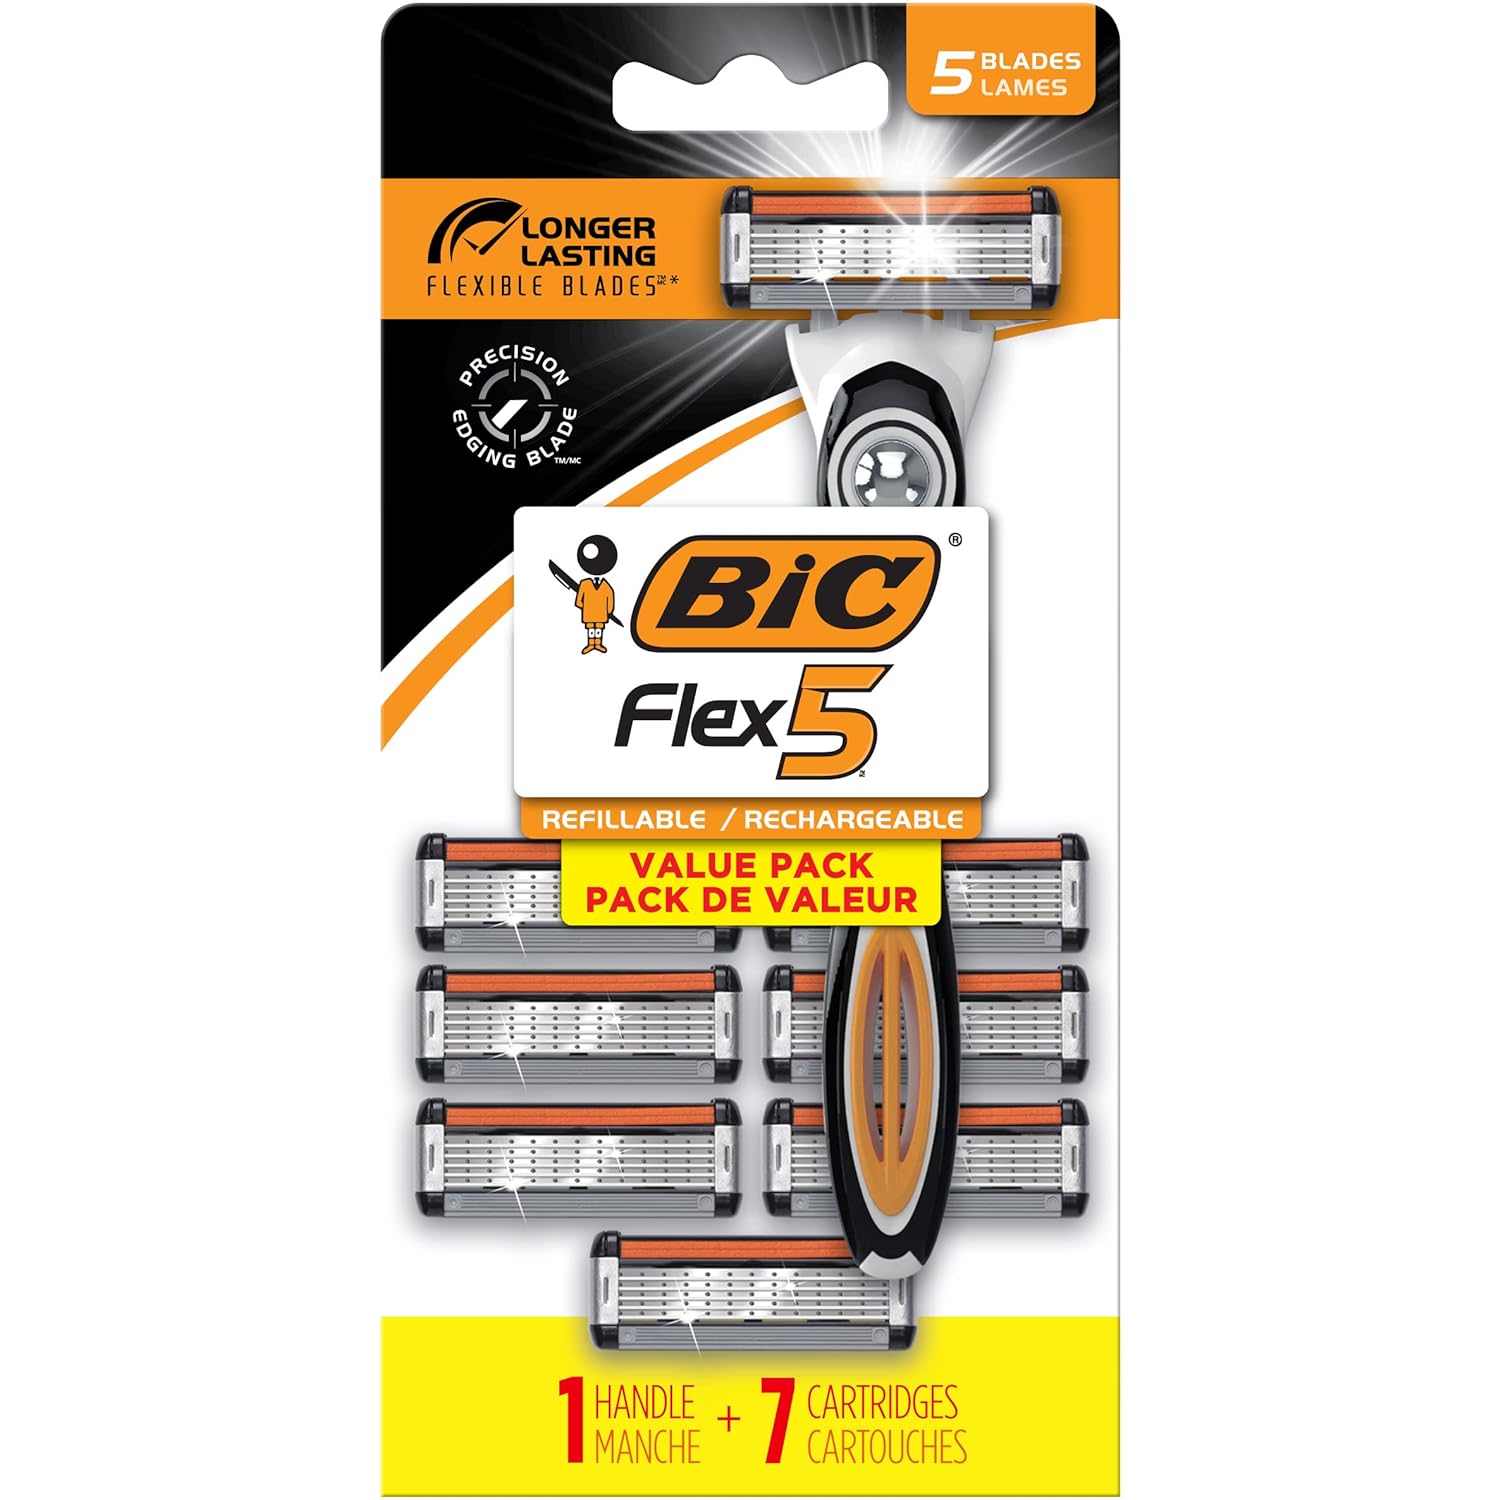 BIC Flex 5 Refillable Razors for Men, Long-Lasting 5 Blade Razors for a Smooth and Comfortable Shave, 1 Handle and 7 Cartridges, 8 Piece Shaving Kit